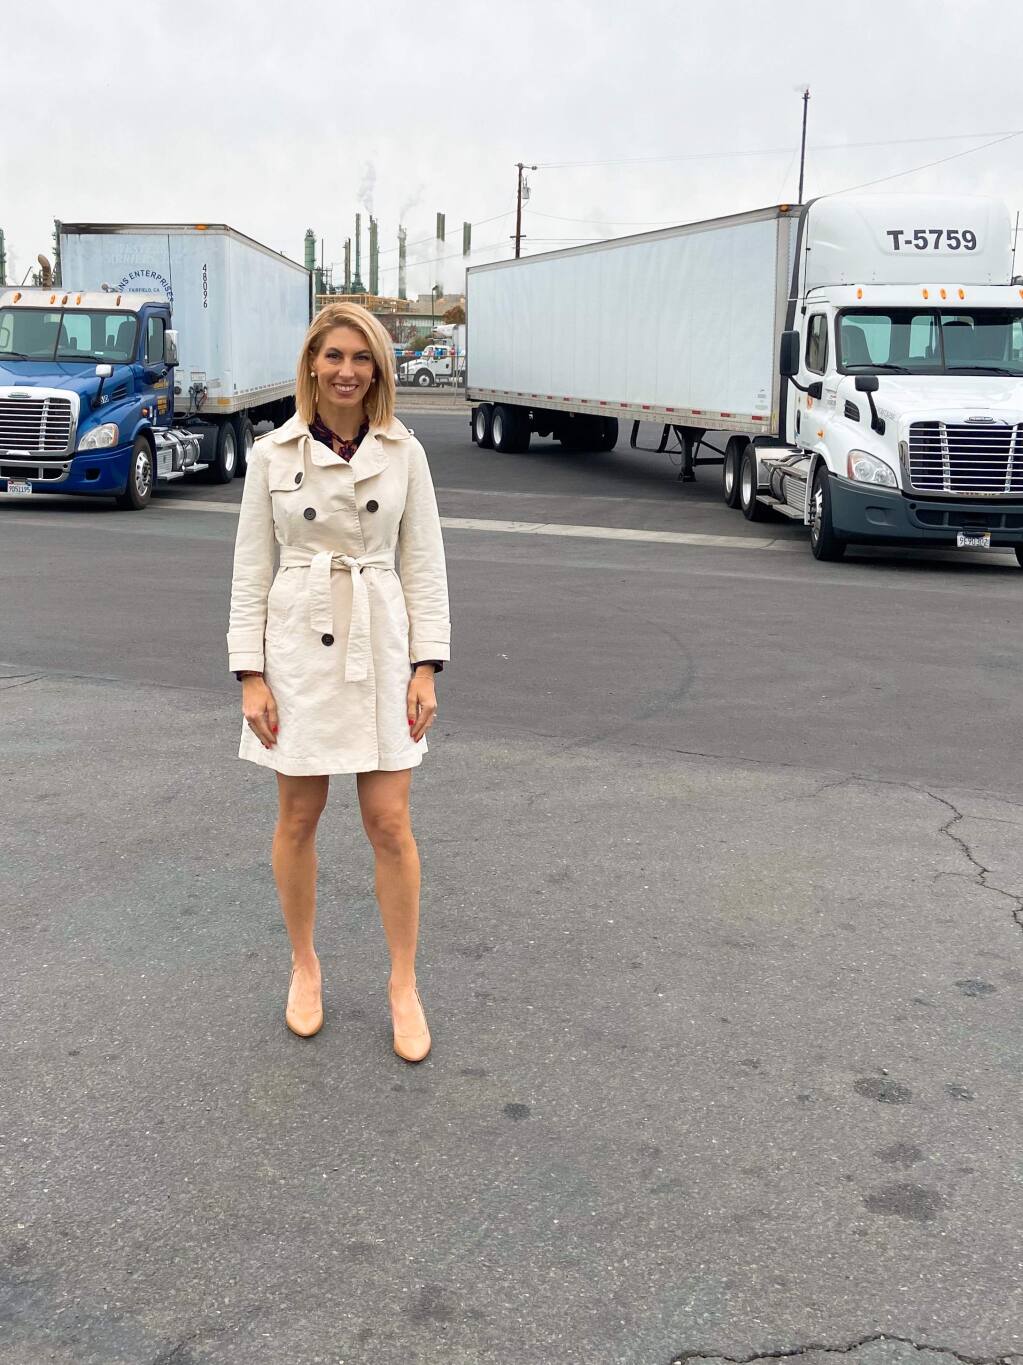 Alicia Yandell Hamilton, vice president of Yandell Truckaway, Yandell Logistics and SW Warehouses, stands in front of affiliated trucks outside the Benicia offices and warehouse on Nov. 26, 2019. (courtesy photo)